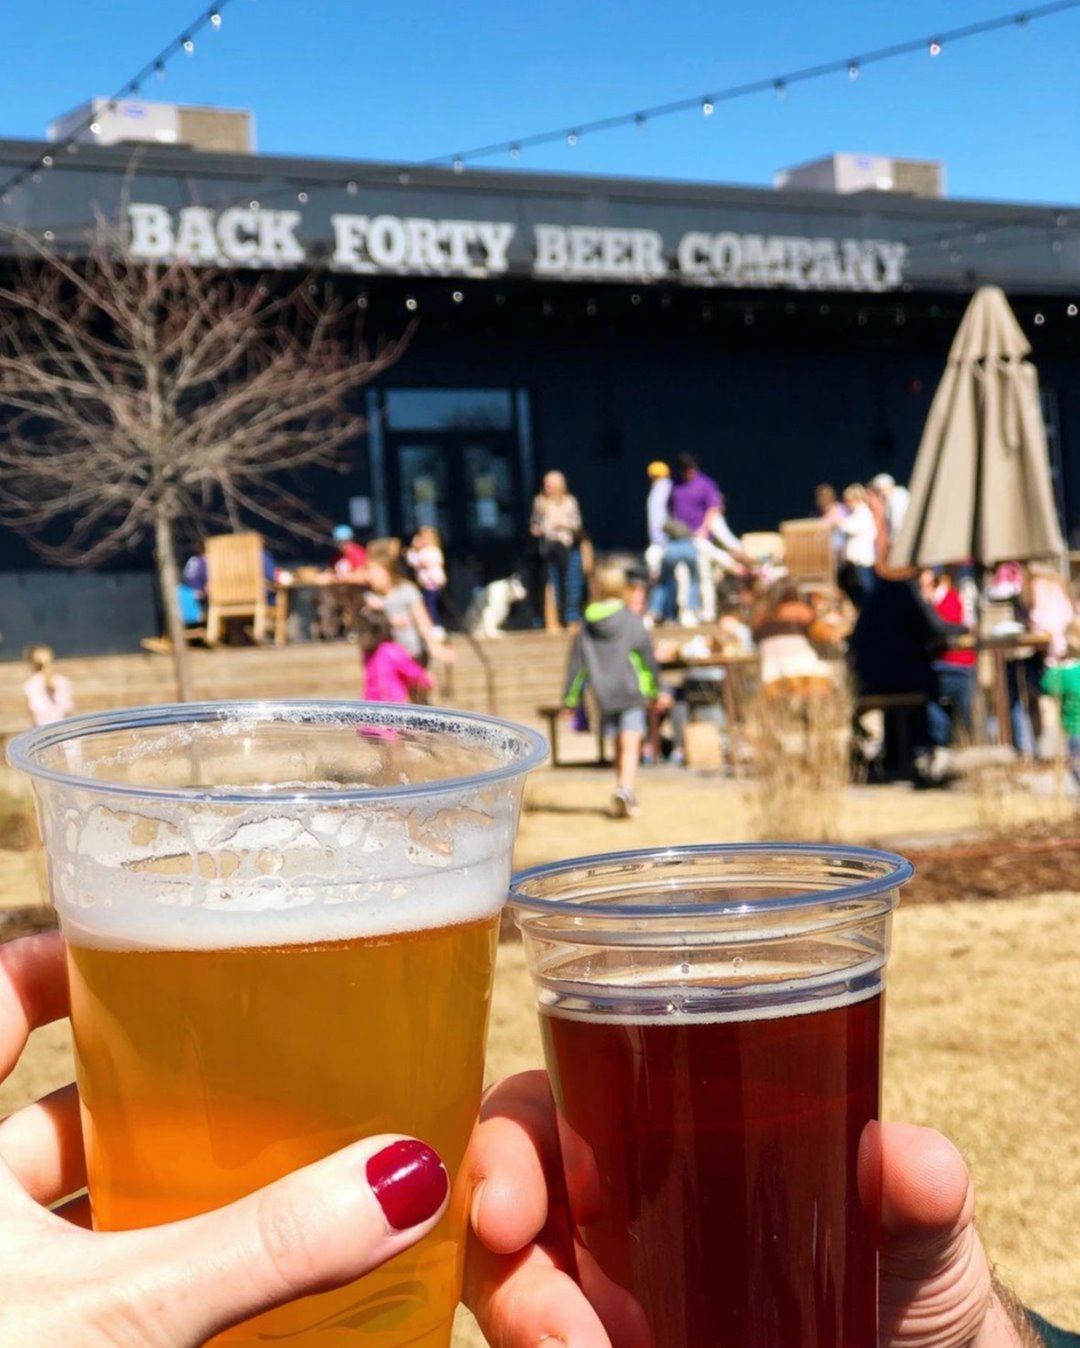 Two cups of beer at Back Forty Beer Co. - St. Patrick's Day in Birmingham